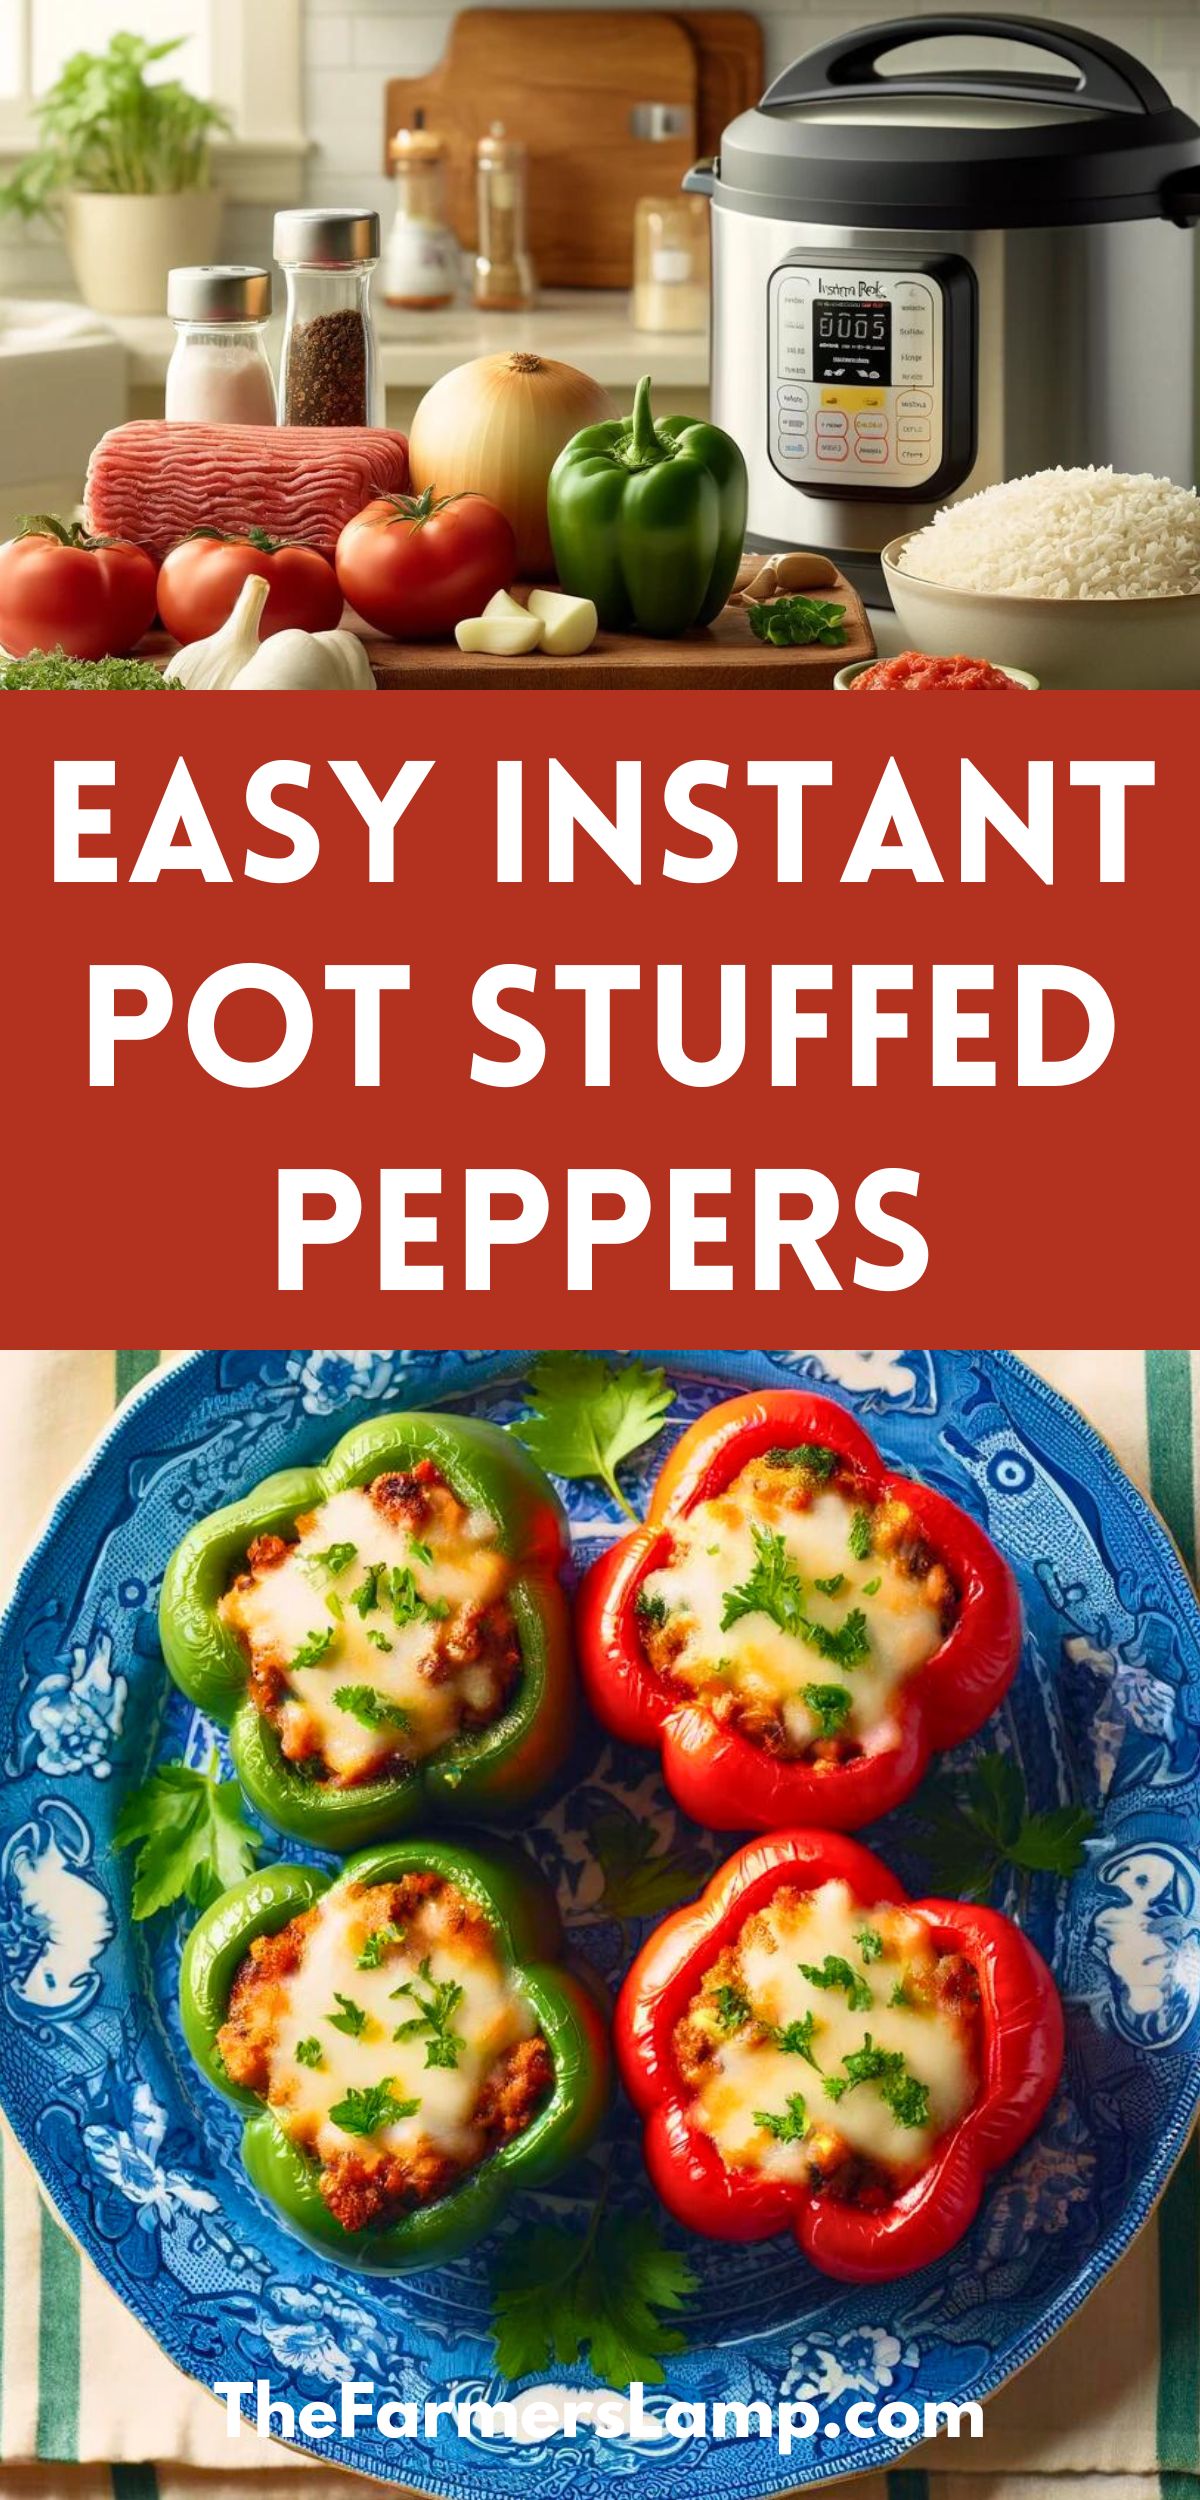 the ingredients for stuffed peppers on my counter and a picture of two green stuffed peppers and two red stuffed peppers on a blue and white plate on a red gingham tablecloth with words written that read easy instant pot stuffed peppers the farmers lamp dot com